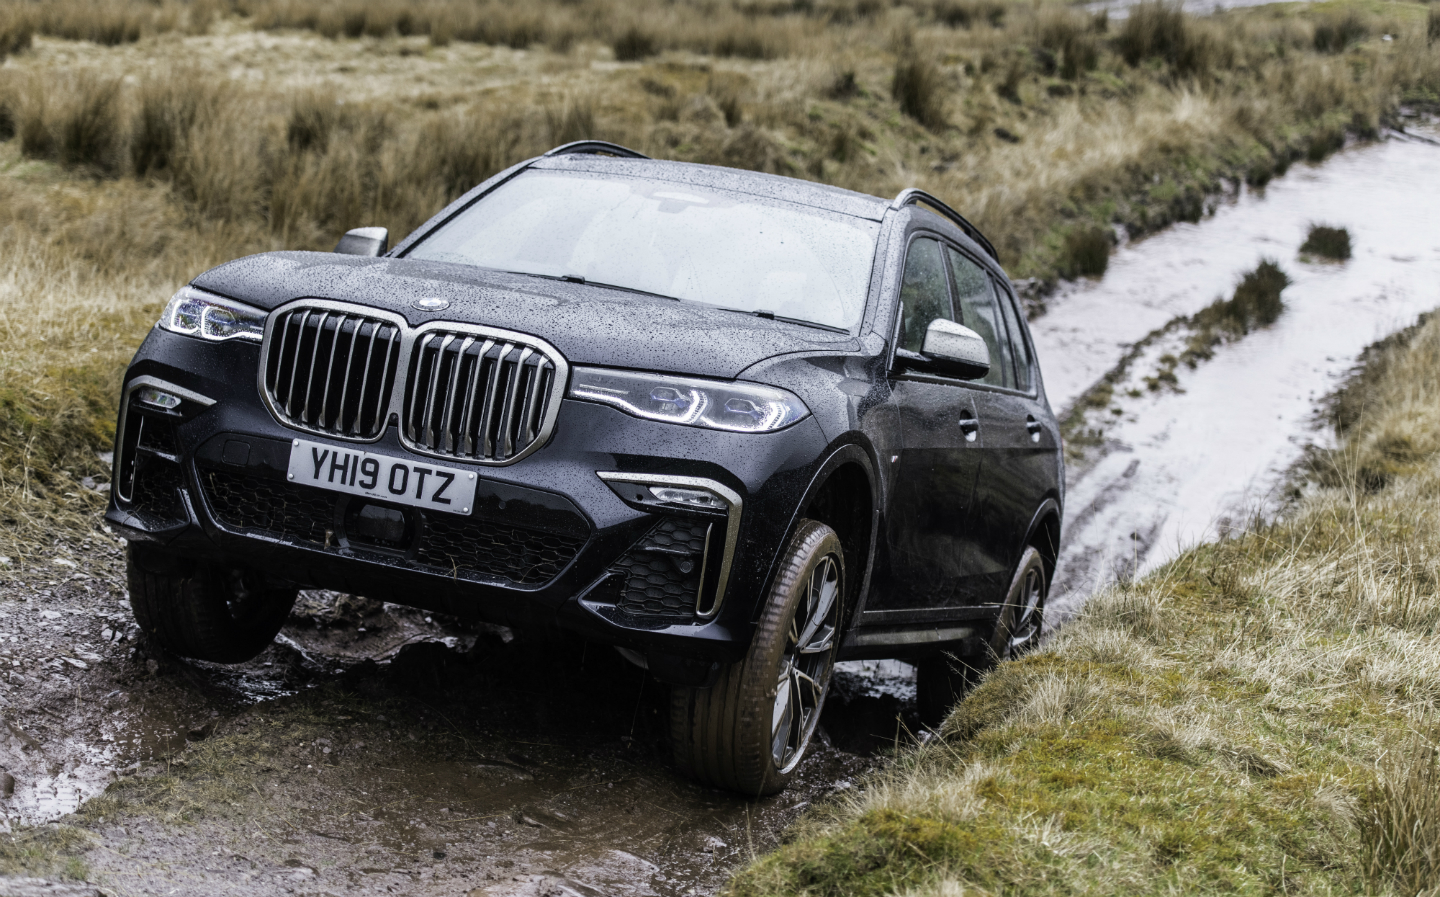 Motor Awards 2019: Best Family SUV of the Year nominees — vote now!